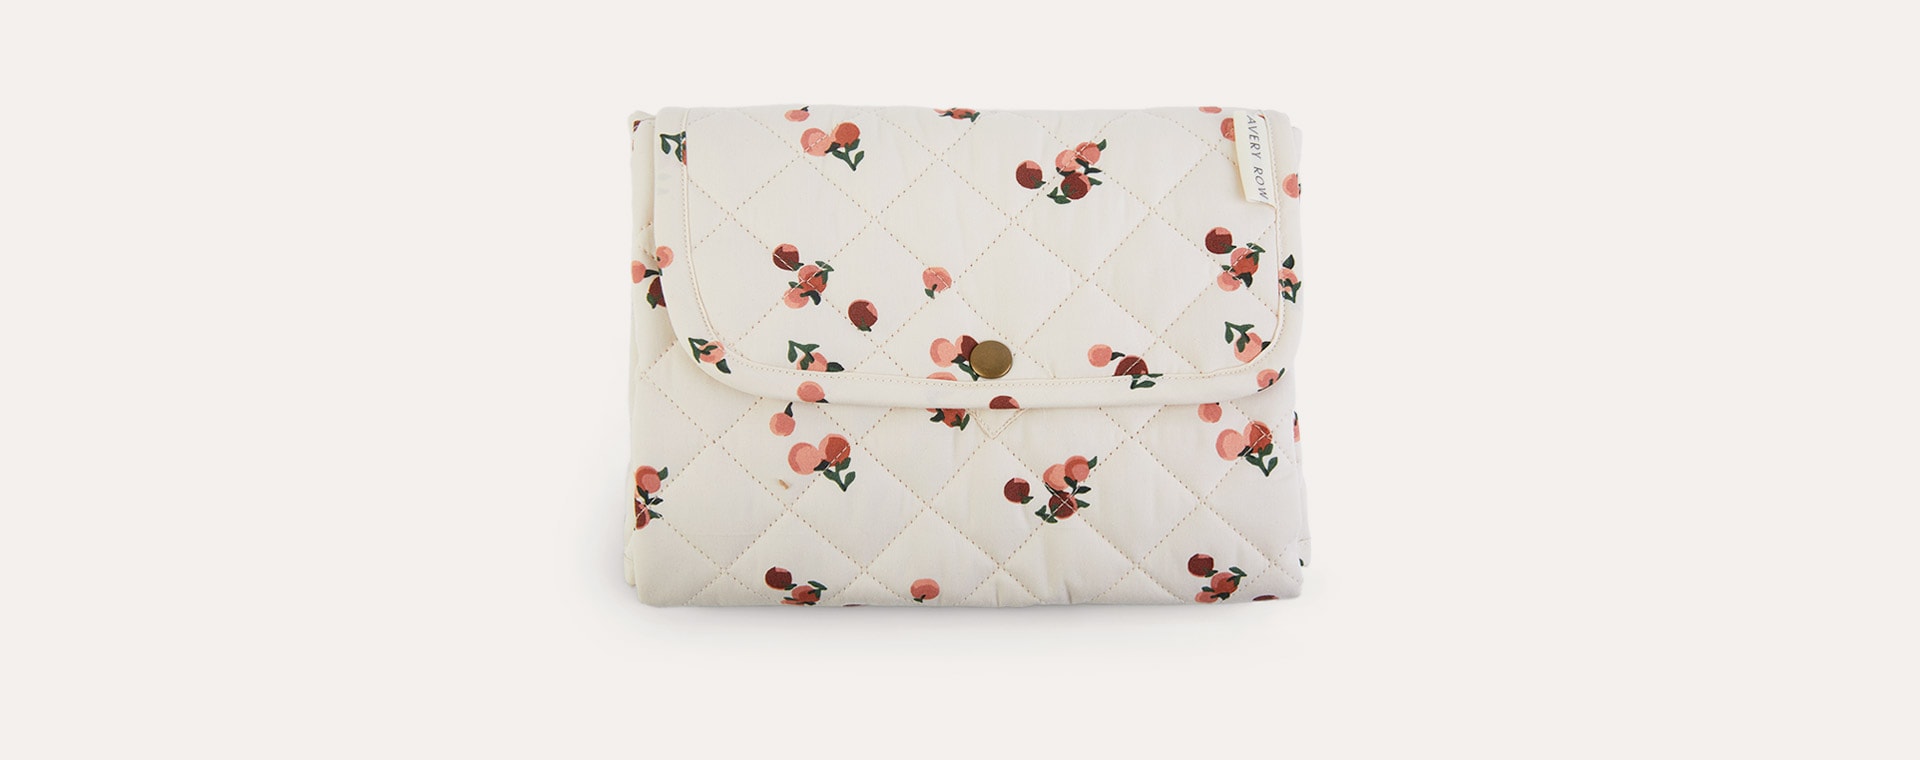 Peaches Avery Row Travel Changing Mat